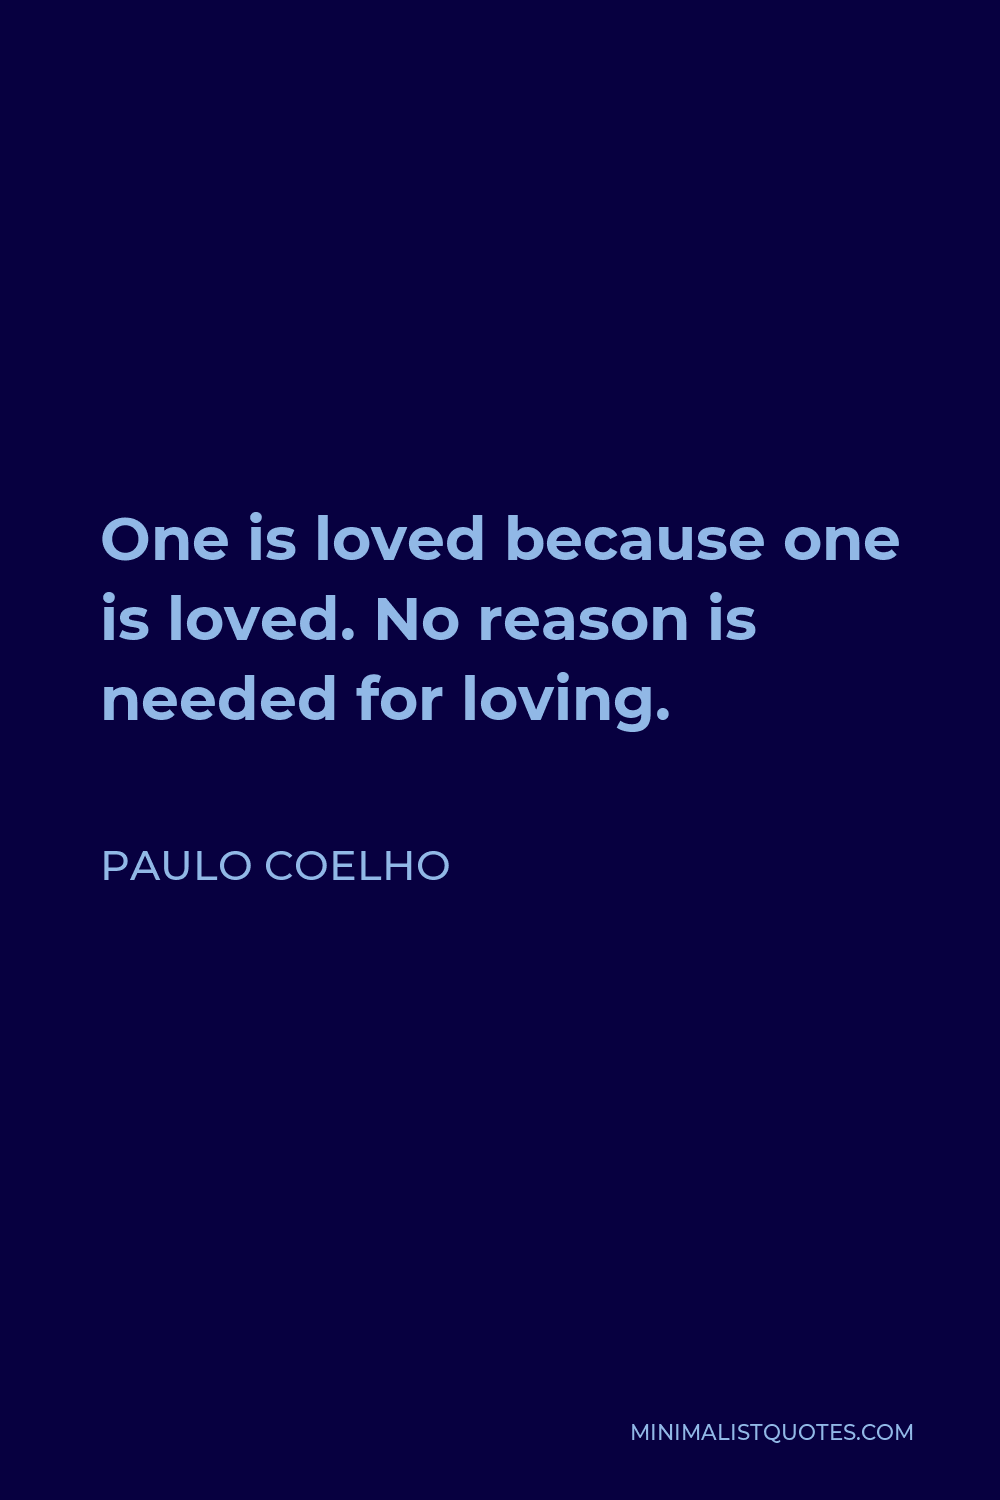 Paulo Coelho Quote - One is loved because one is loved. No reason is needed for loving.